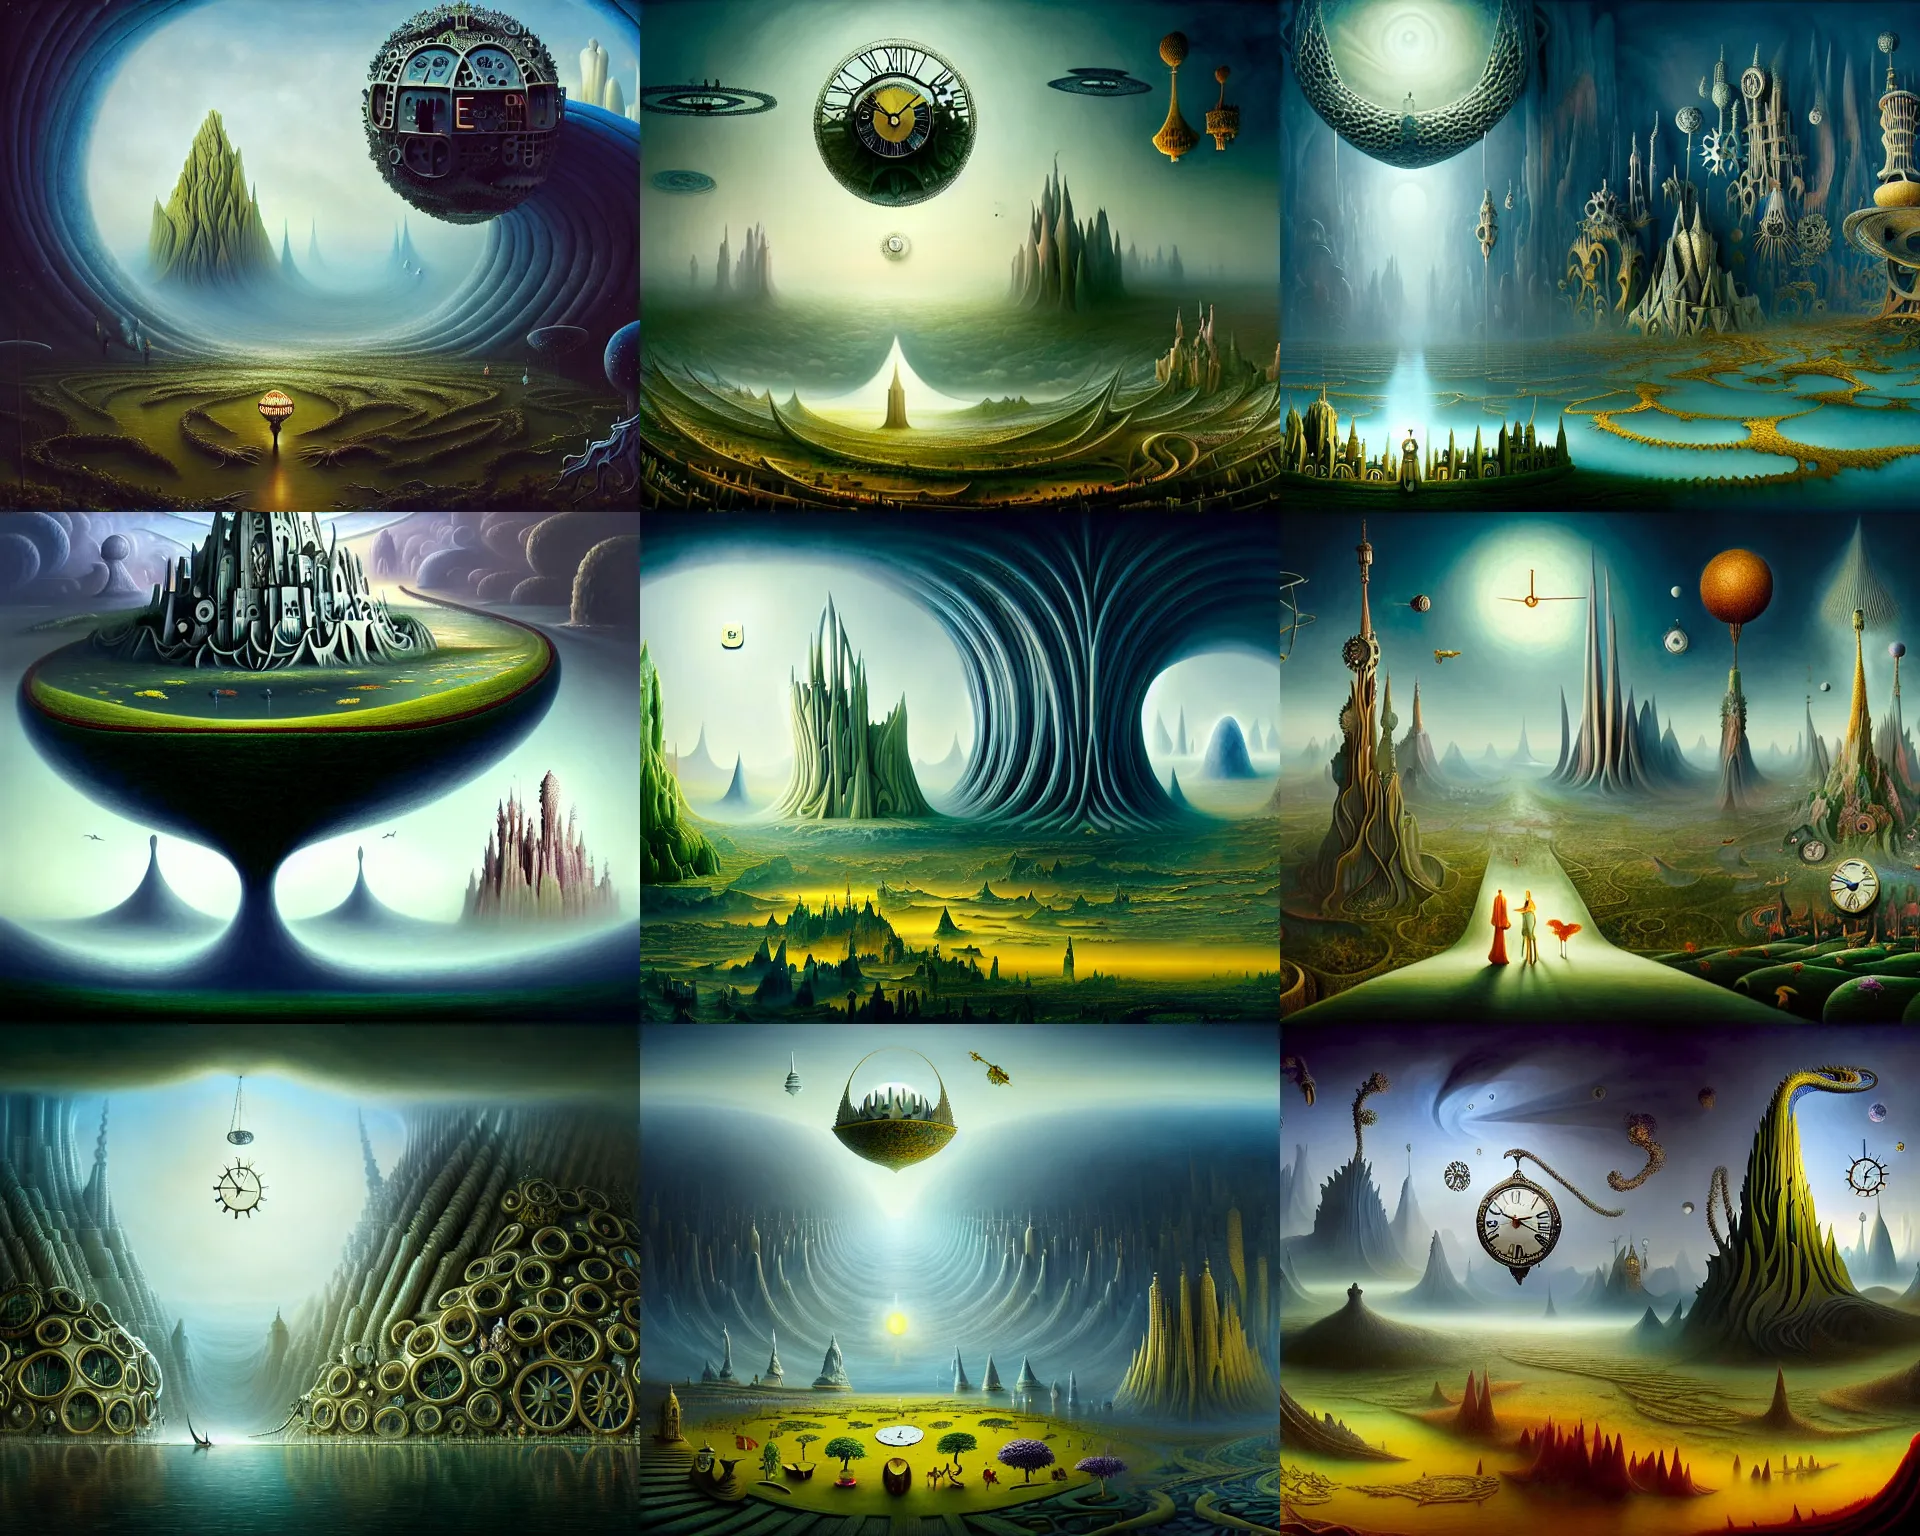 Prompt: a beguiling epic stunning beautiful and insanely detailed matte painting of dream worlds, the land of clocks and gears at the end of space and time with surreal architecture designed by Heironymous Bosch, with mega structures inspired by Heironymous Bosch's Garden of Earthly Delights, vast surreal landscape and horizon by Cyril Rolando and Natalie Shau and Frank Gehry and Noah Bradley, masterpiece!!!, grand!, imaginative!!!, whimsical!!, epic scale, intricate details, sense of awe, elite, wonder, insanely complex, masterful composition!!!, sharp focus, fantasy realism, dramatic lighting